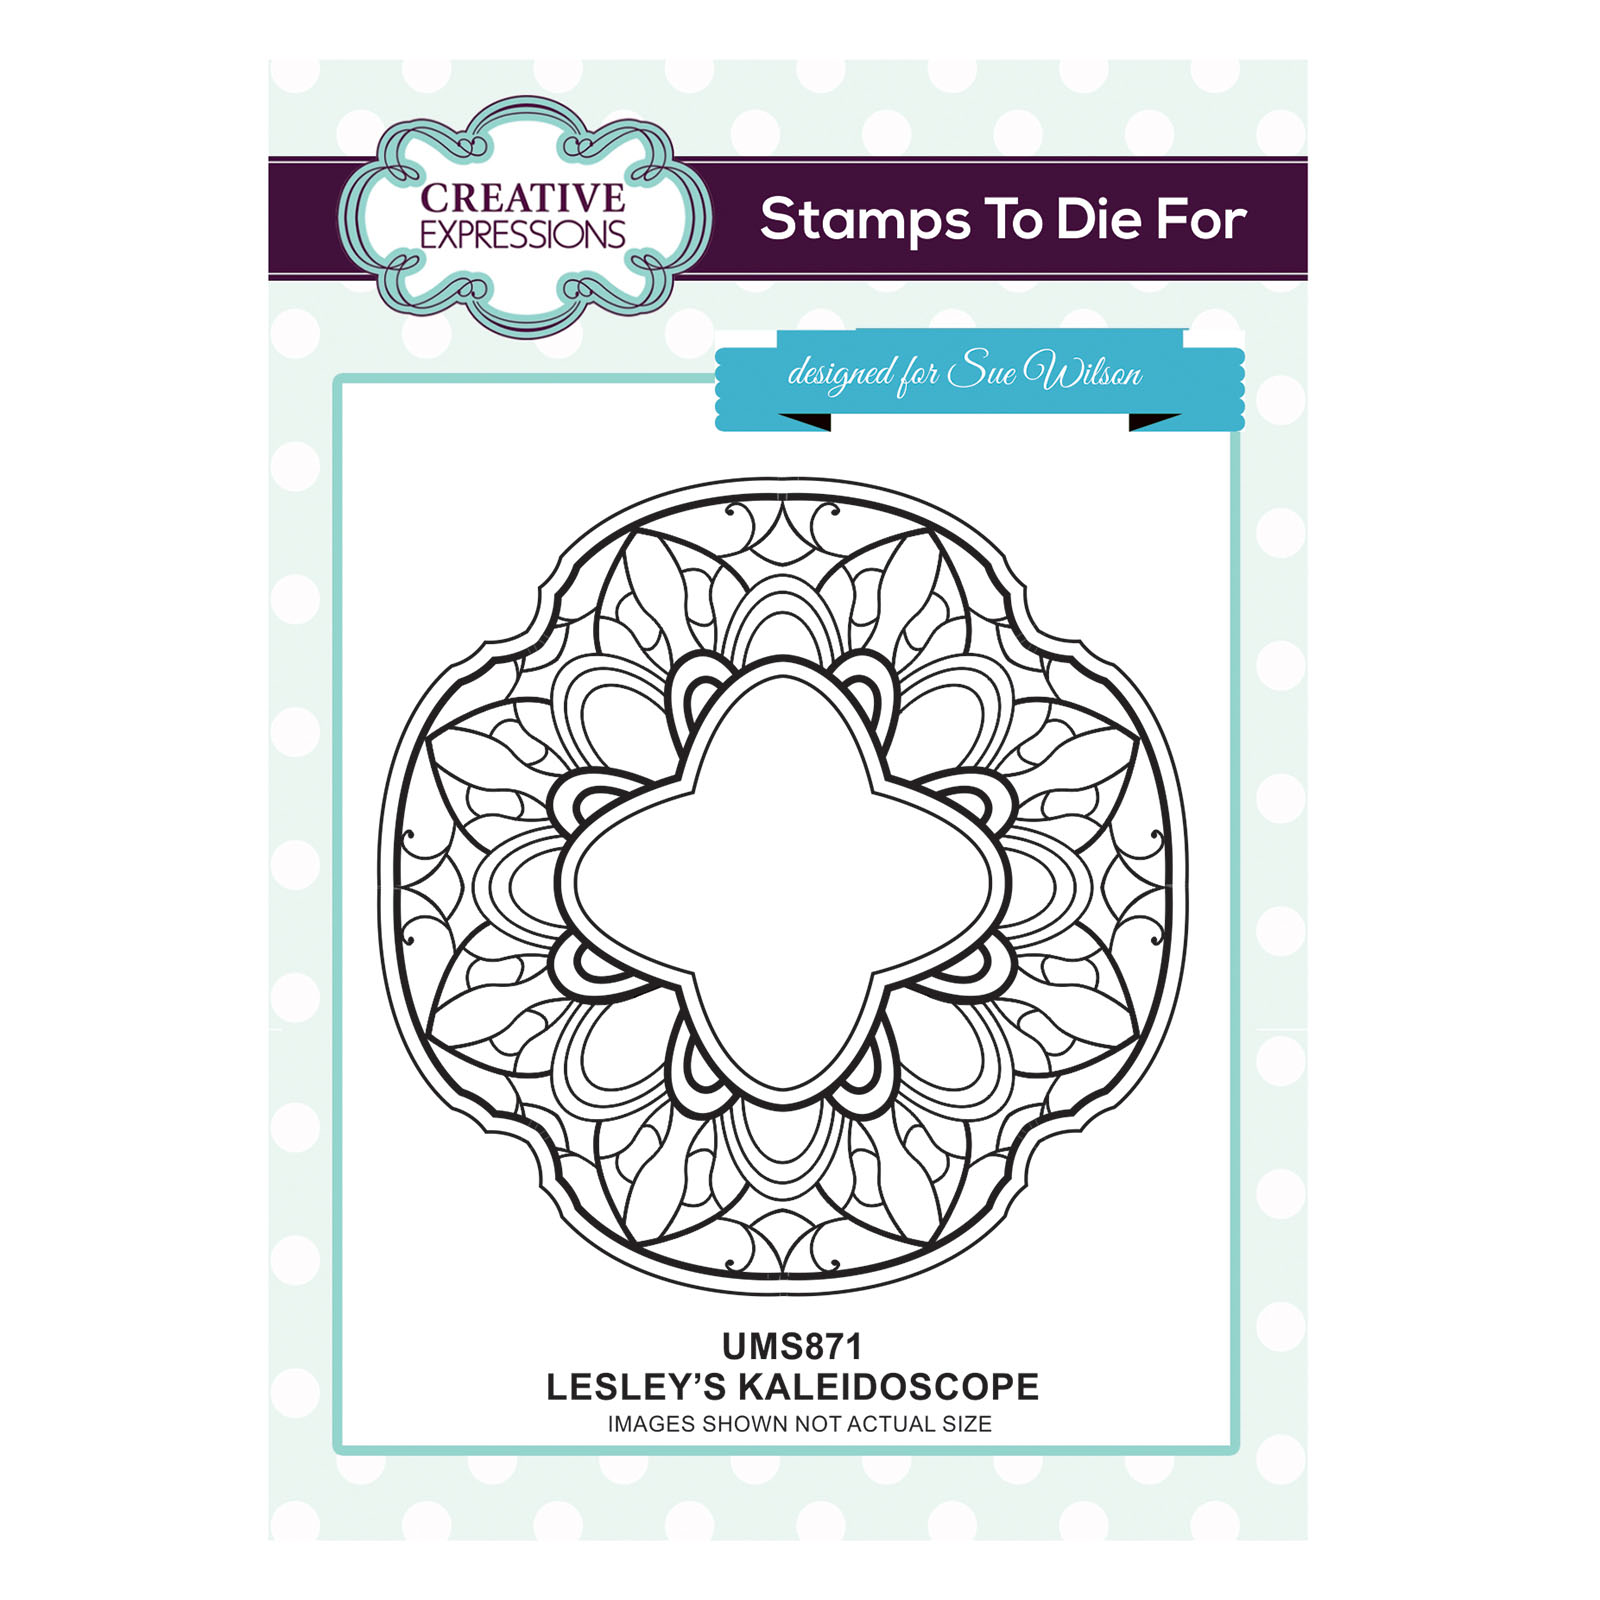 Creative Expressions • Stamps to die for Lesley's Kaleidoscope